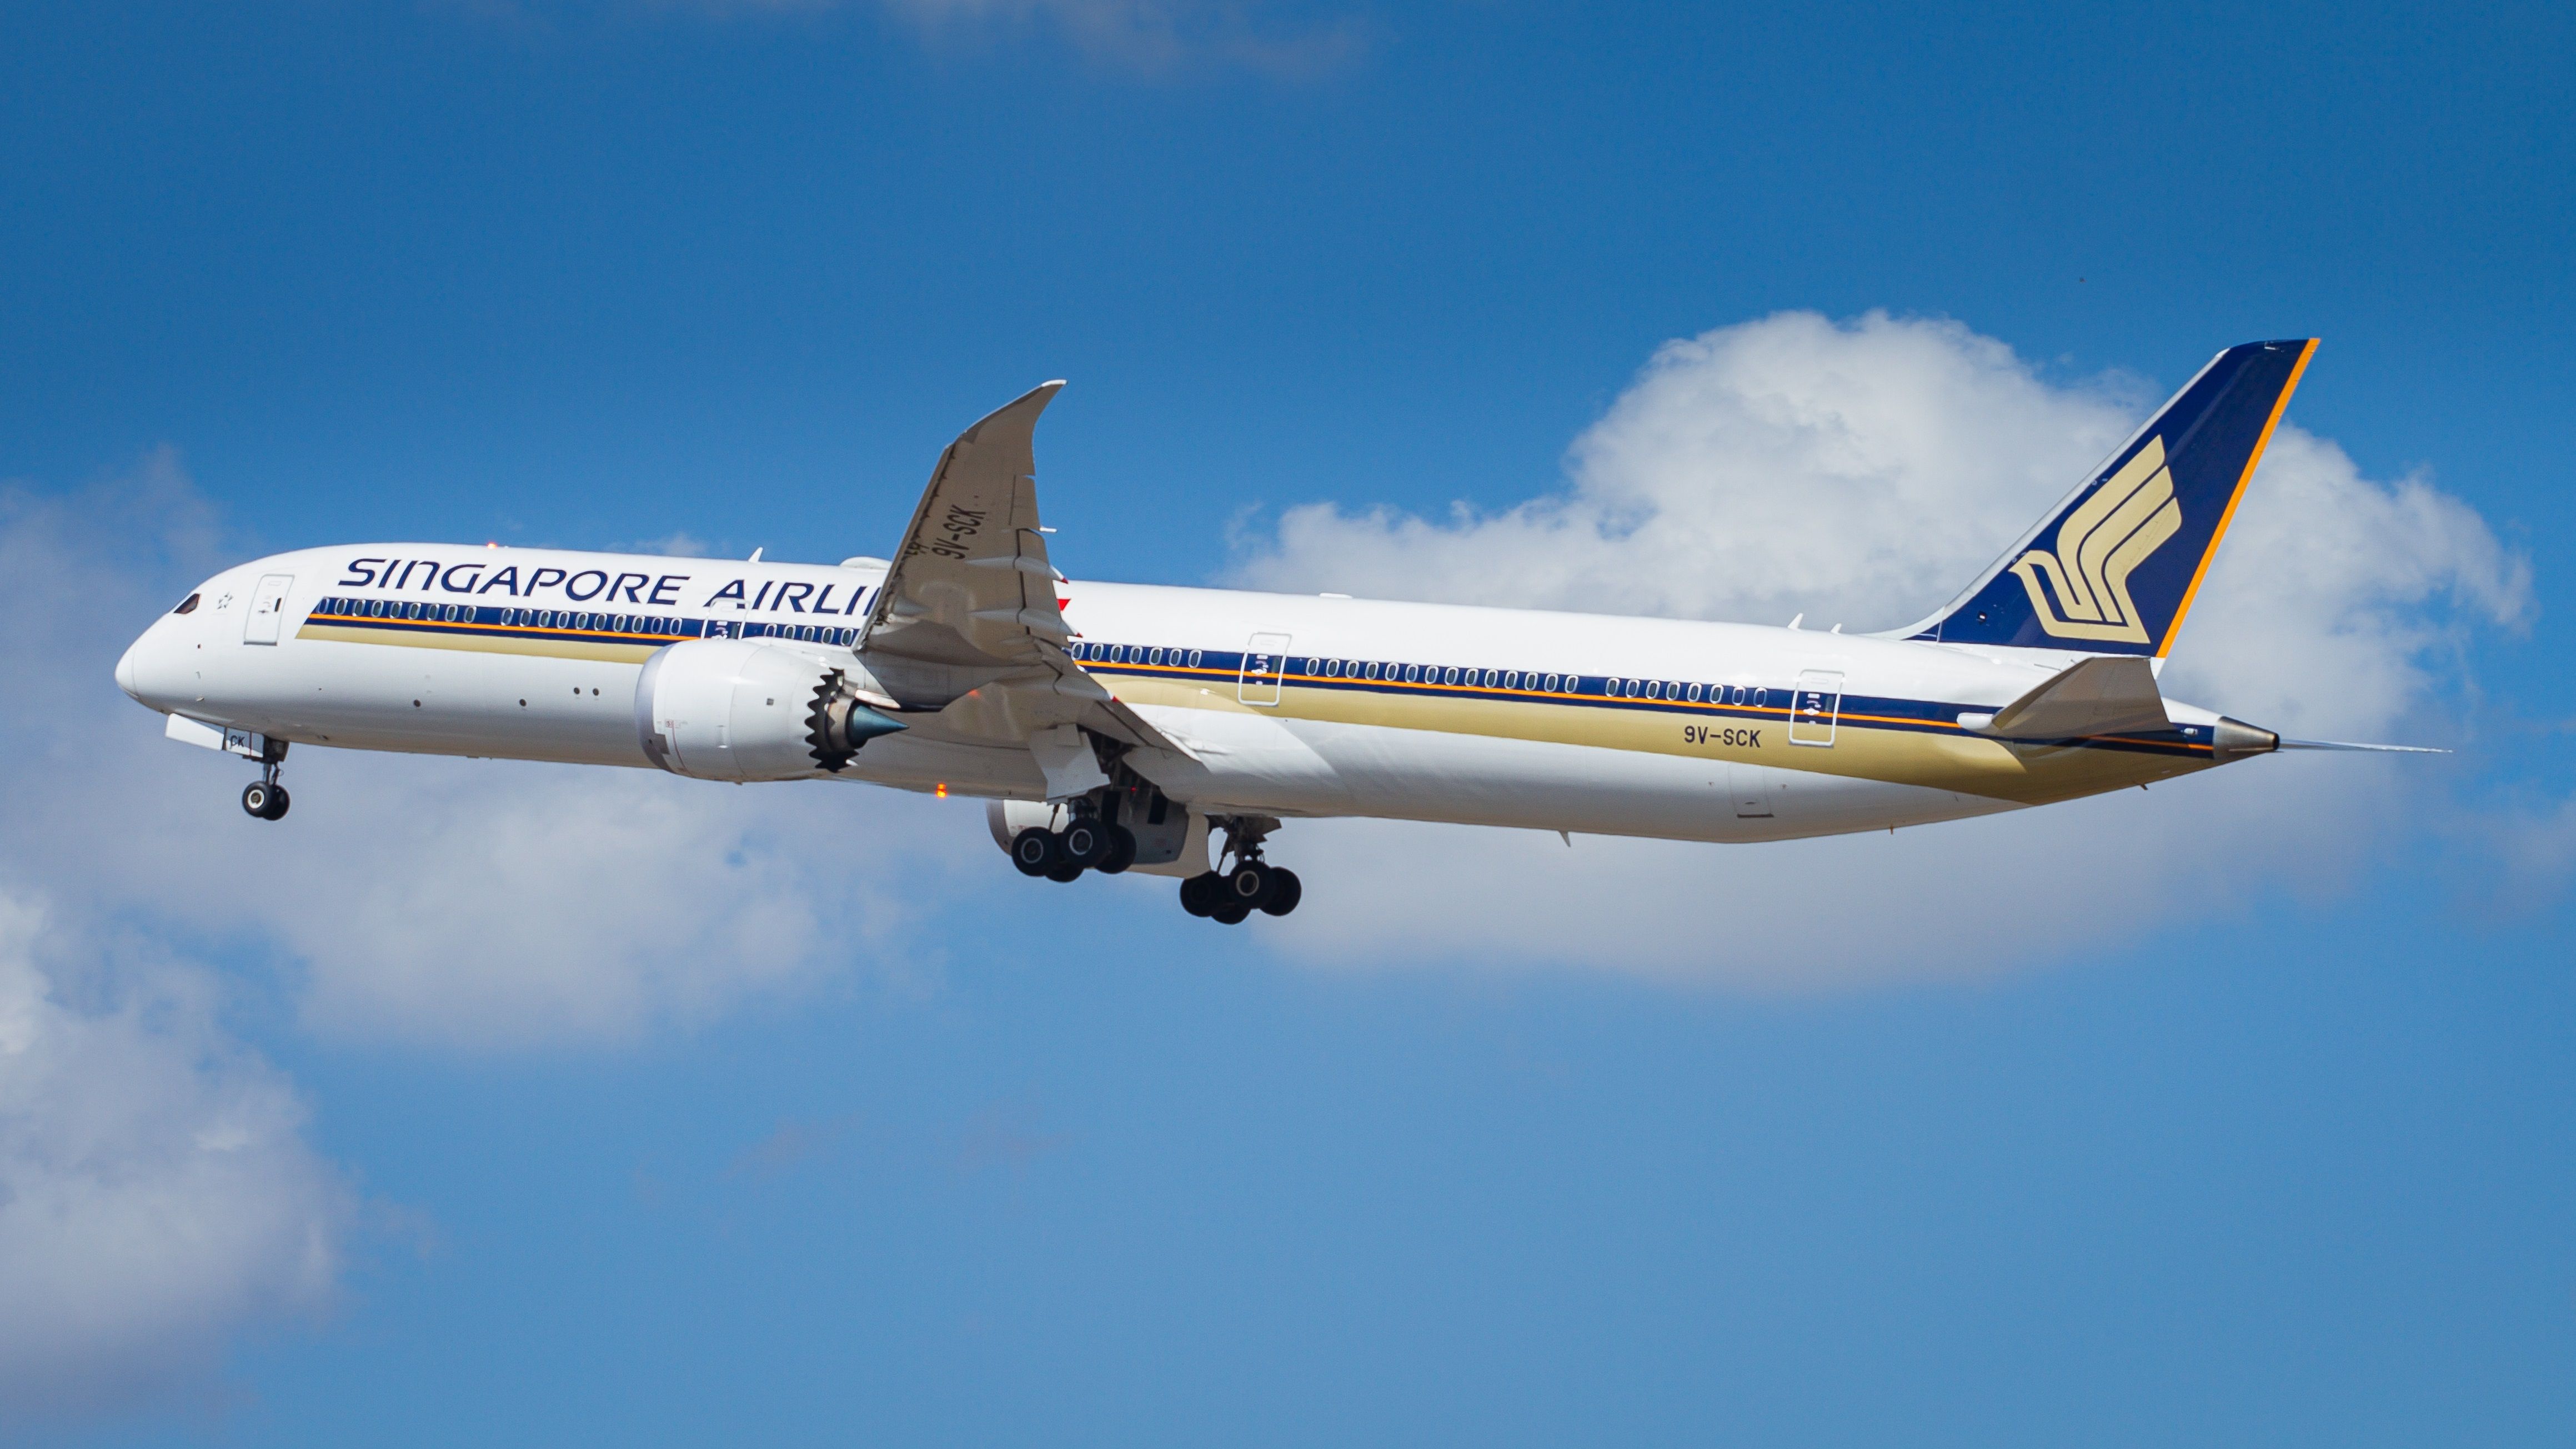 Singapore Airlines 787 take off